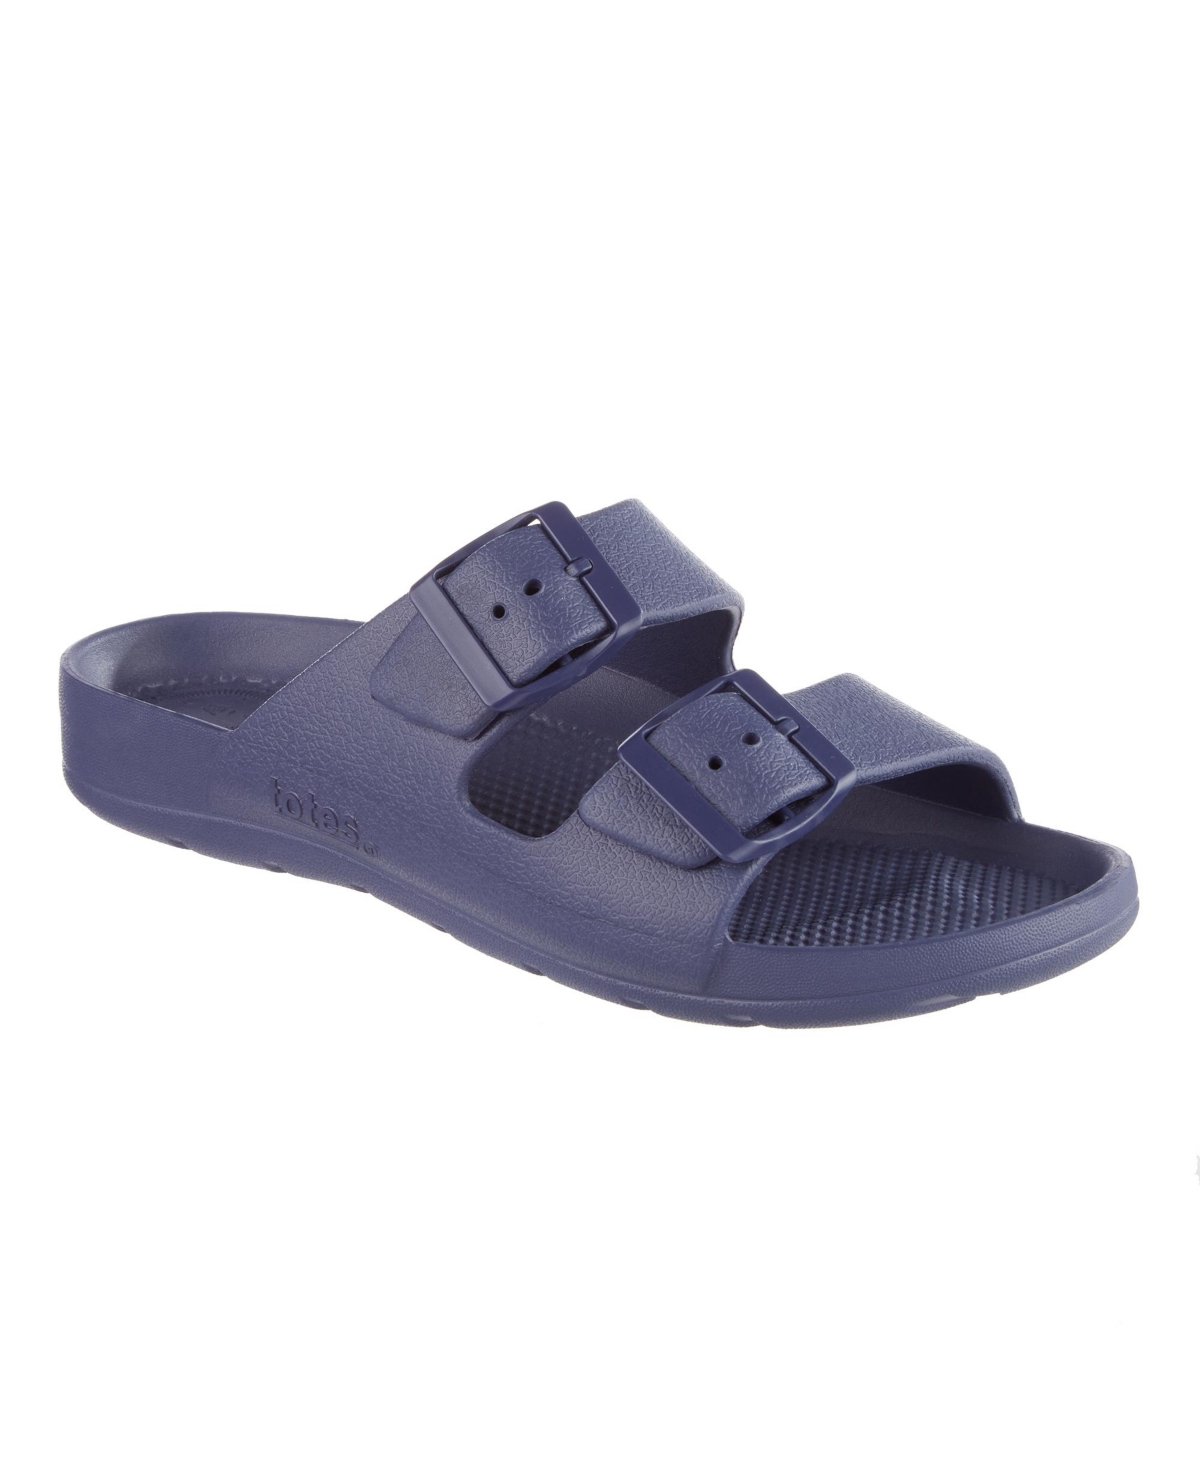 Totes Women's Double Buckle Adjustable Slide With Everywear In Navy Blue